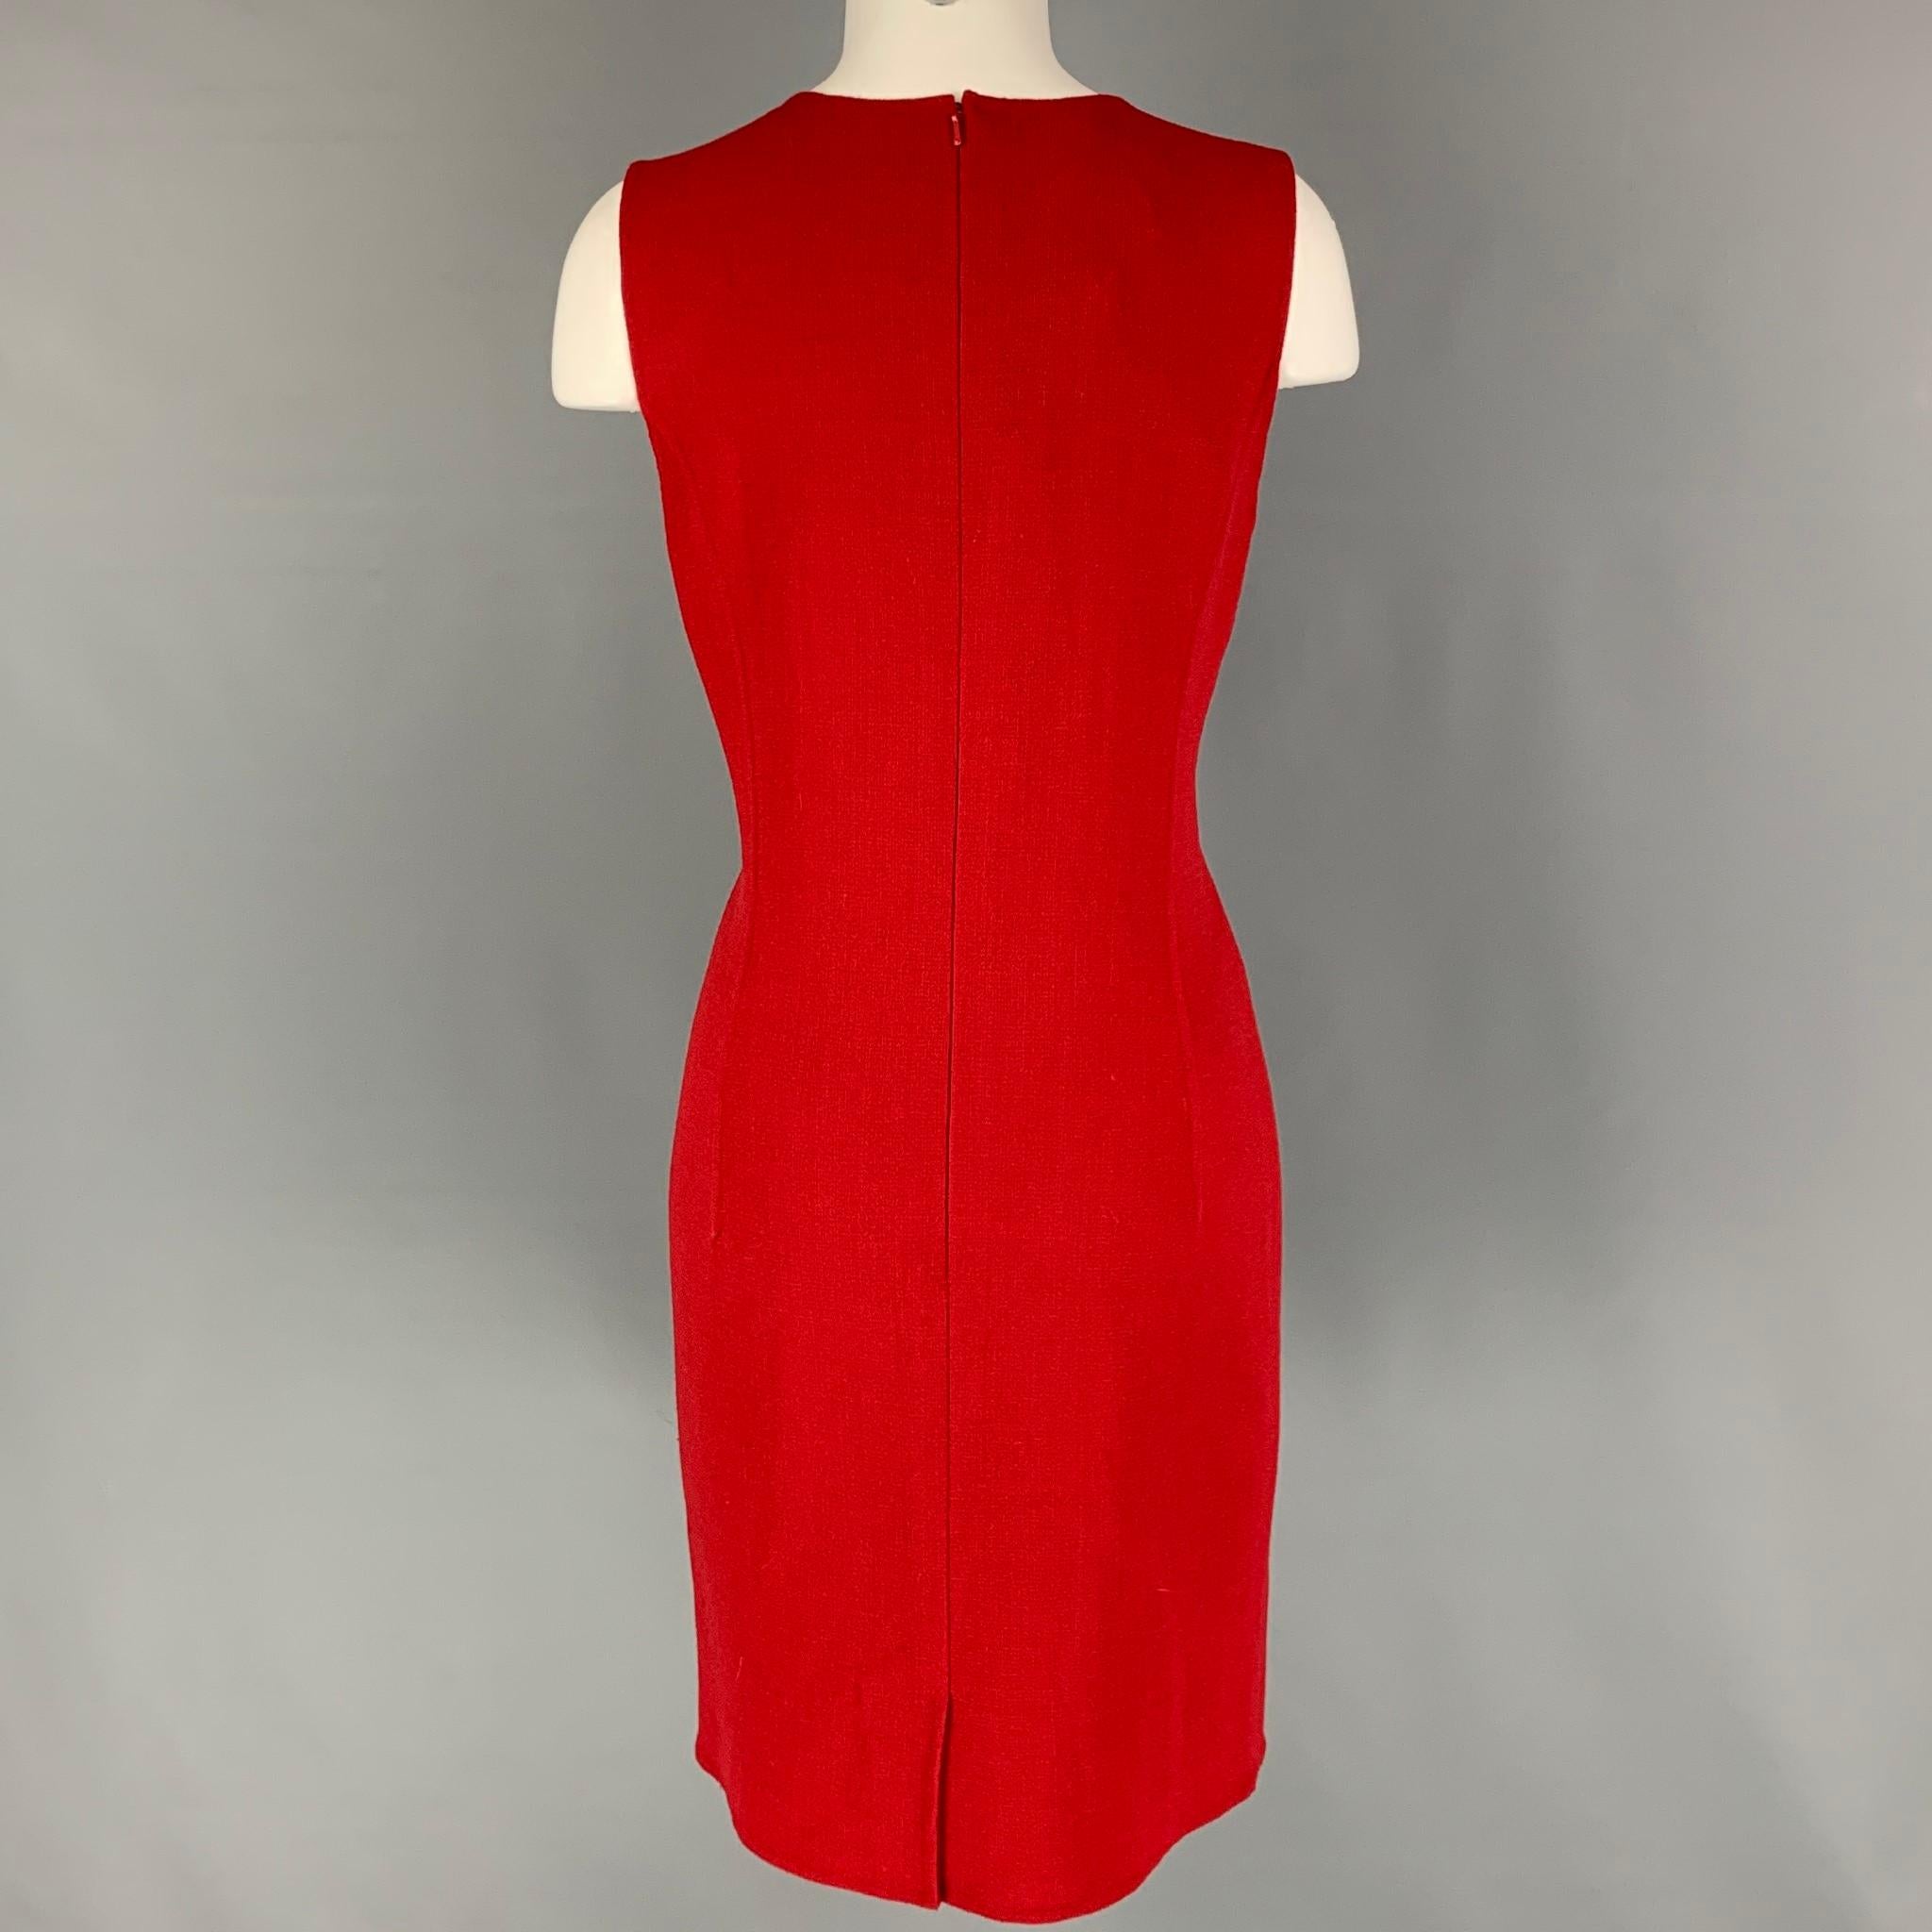 OSCAR DE LA RENTA dress comes in a red virgin wool blend featuring a shift style, sleeveless, and a back zip up closure. Matching jacket sole separately. Made in Italy. 

New With Tags.
Marked:

Measurements:

Shoulder: 13.5 in.
Bust: 36 in.
Waist: